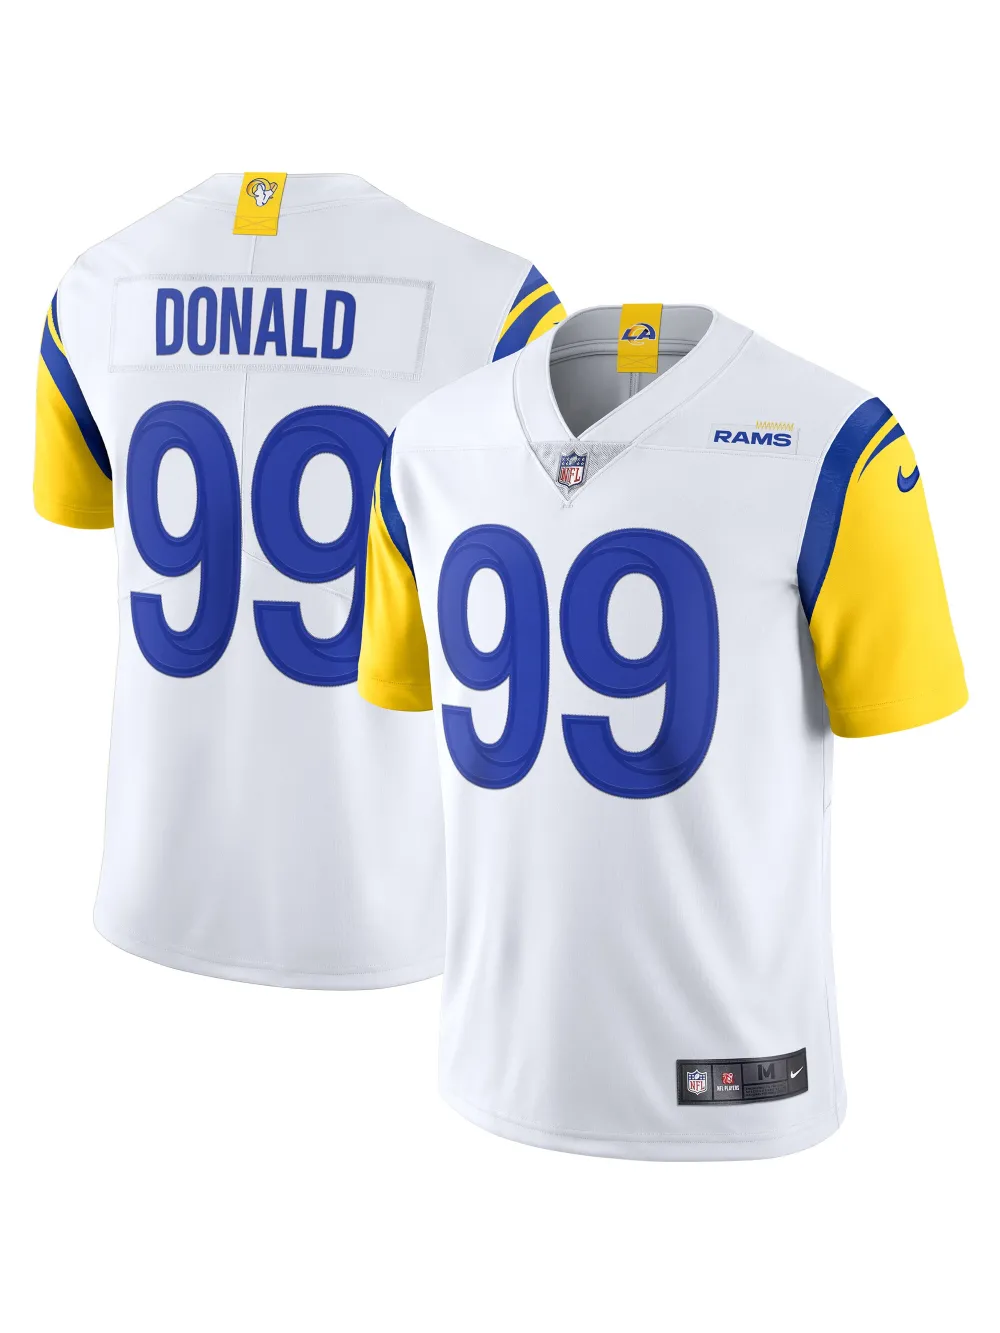 Los Angeles Rams Aaron Donald Nike White Alternate Vapor Limited Edition Jersey